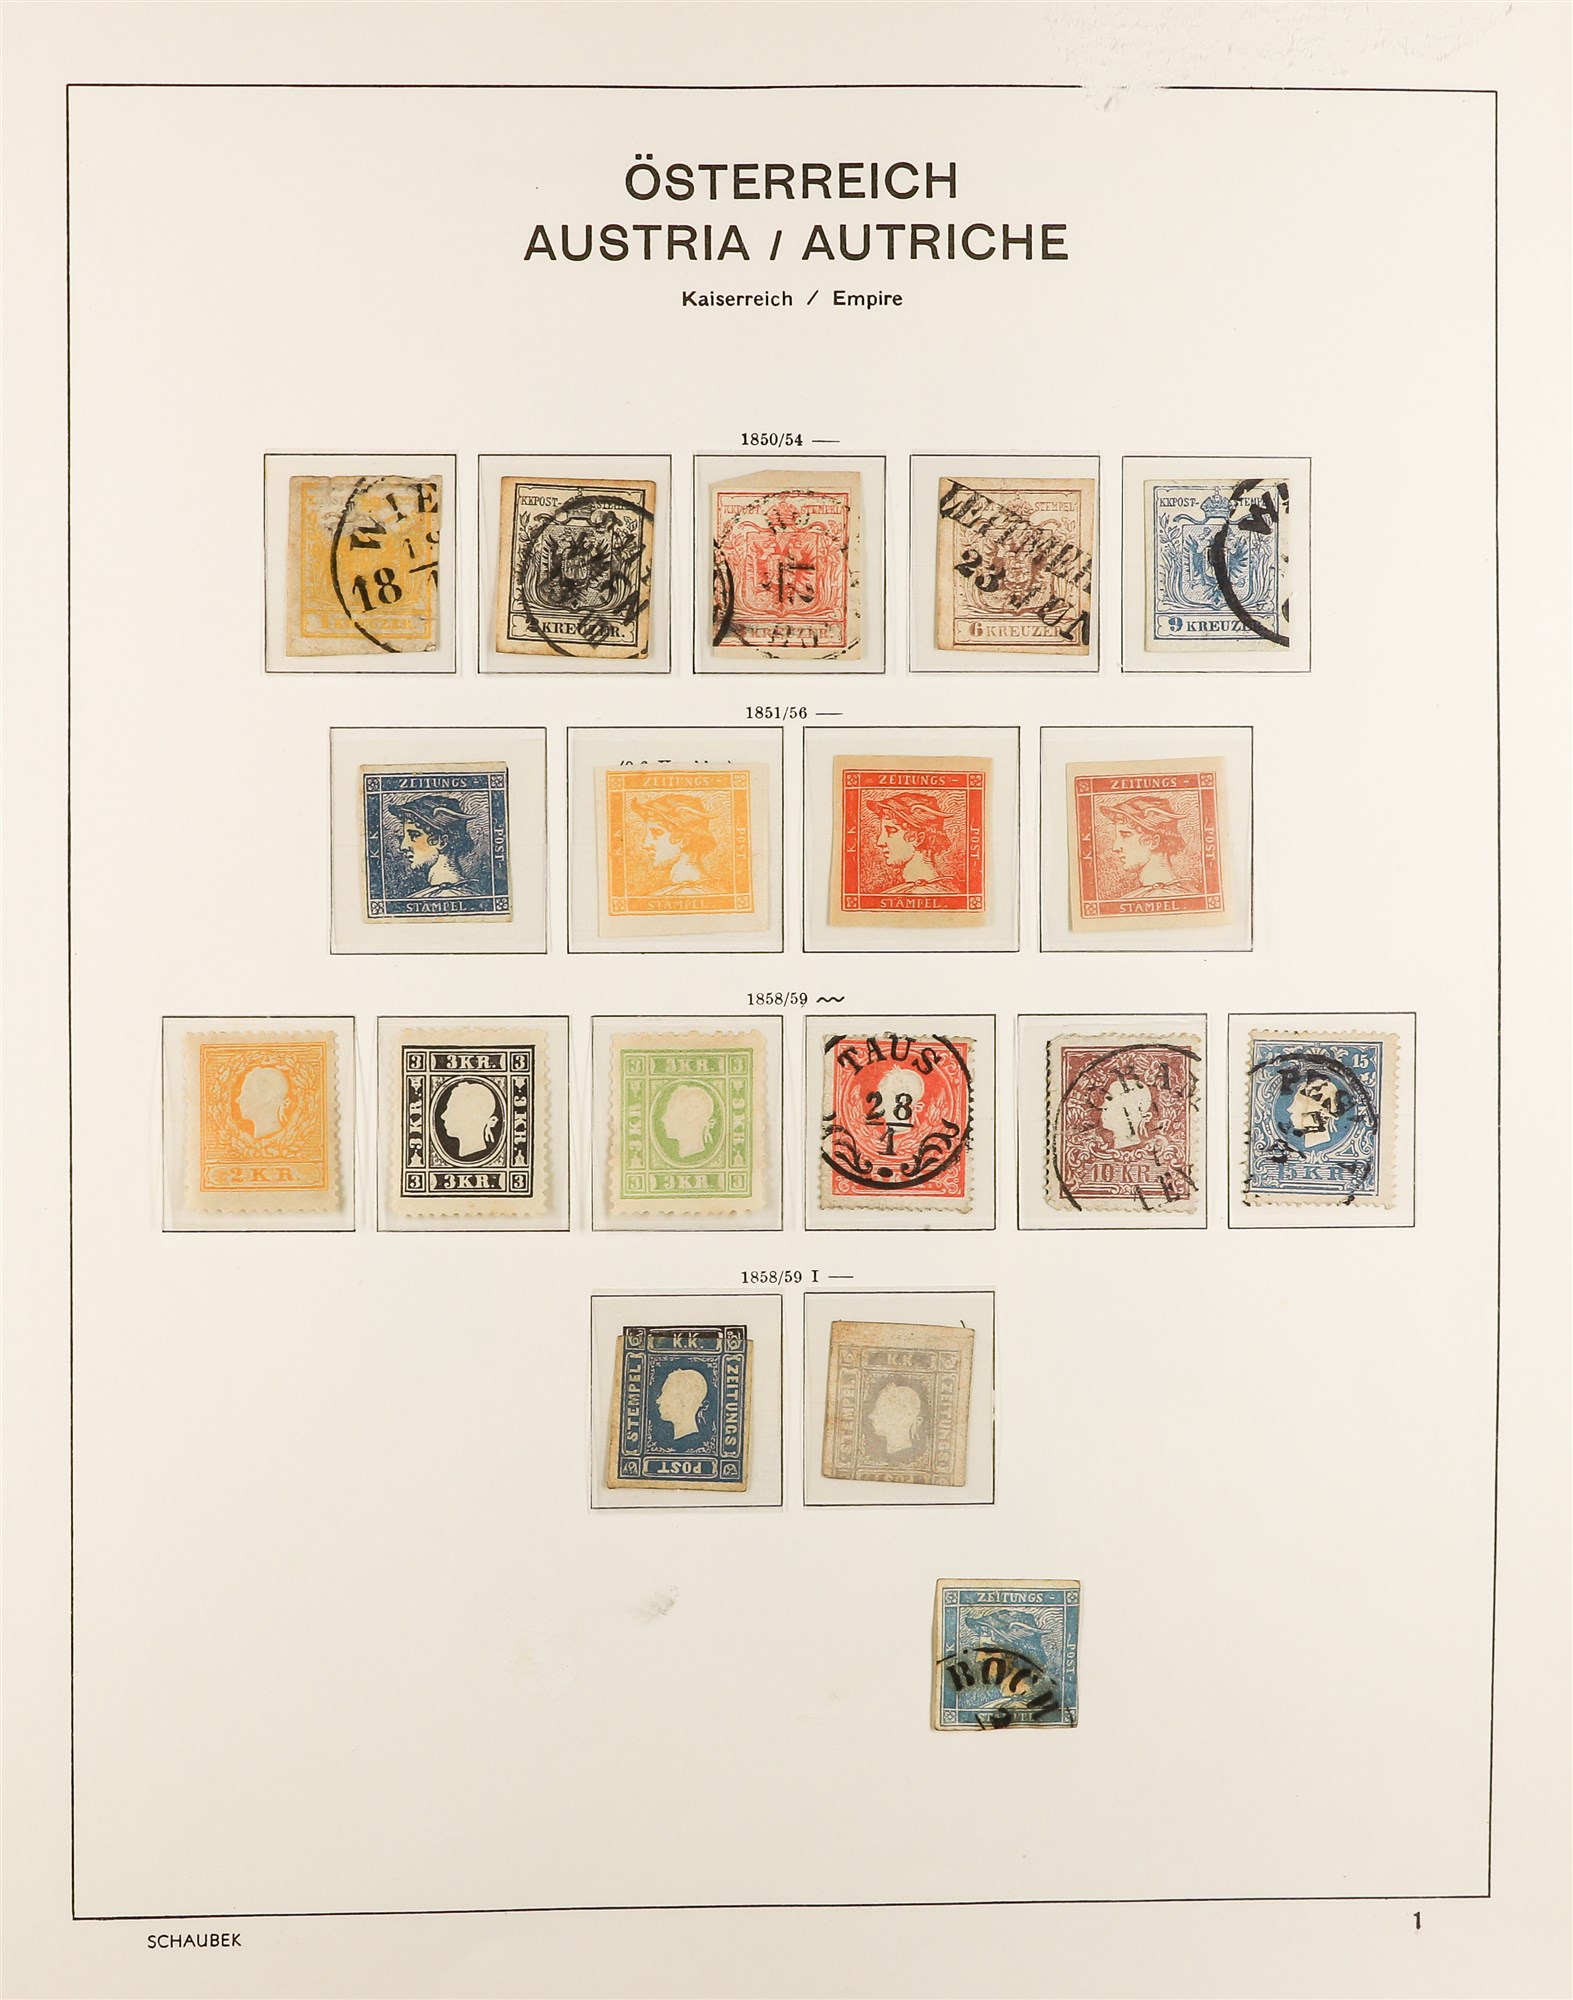 AUSTRIA 1850 - 1937 COLLECTION. of around 1000 mint & used stamps in Schaubek Austria hingeless - Image 2 of 29